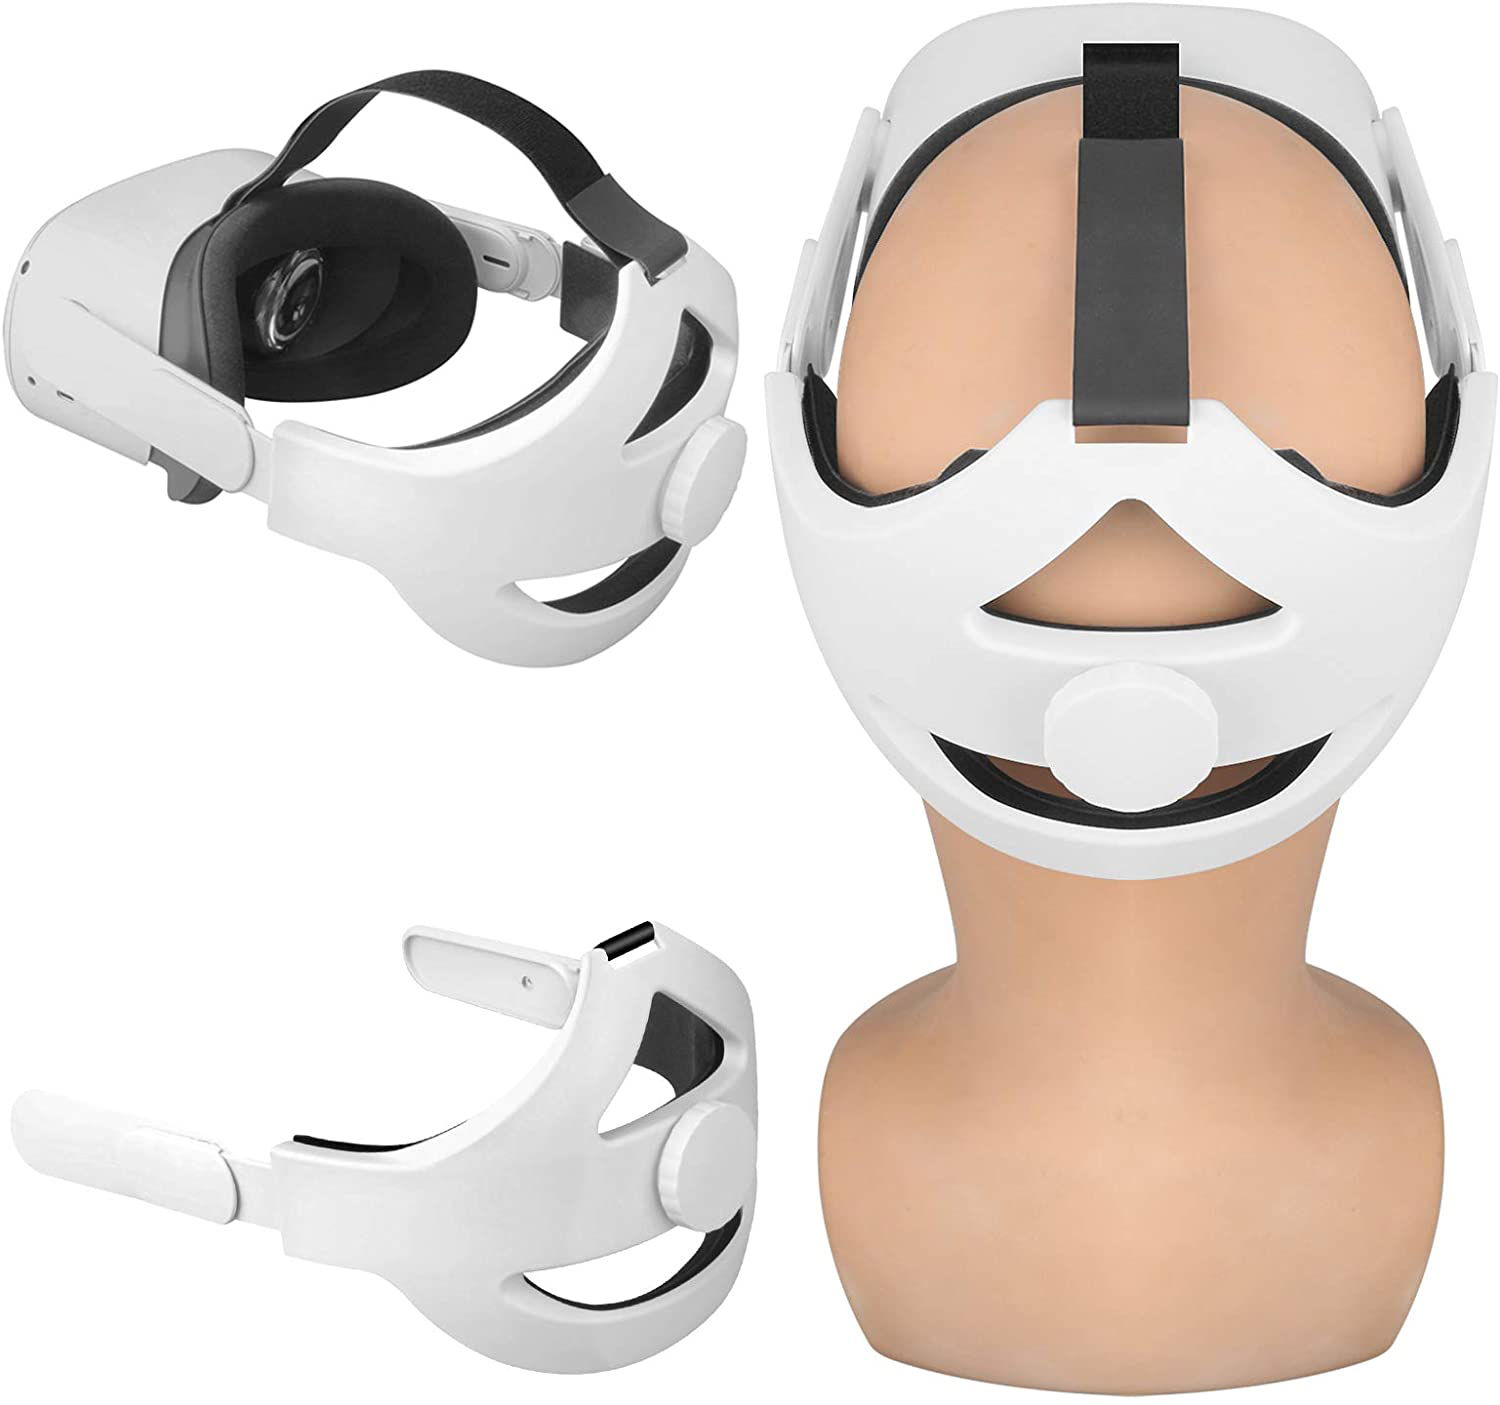 strap for your Meta Quest 2 VR headset.